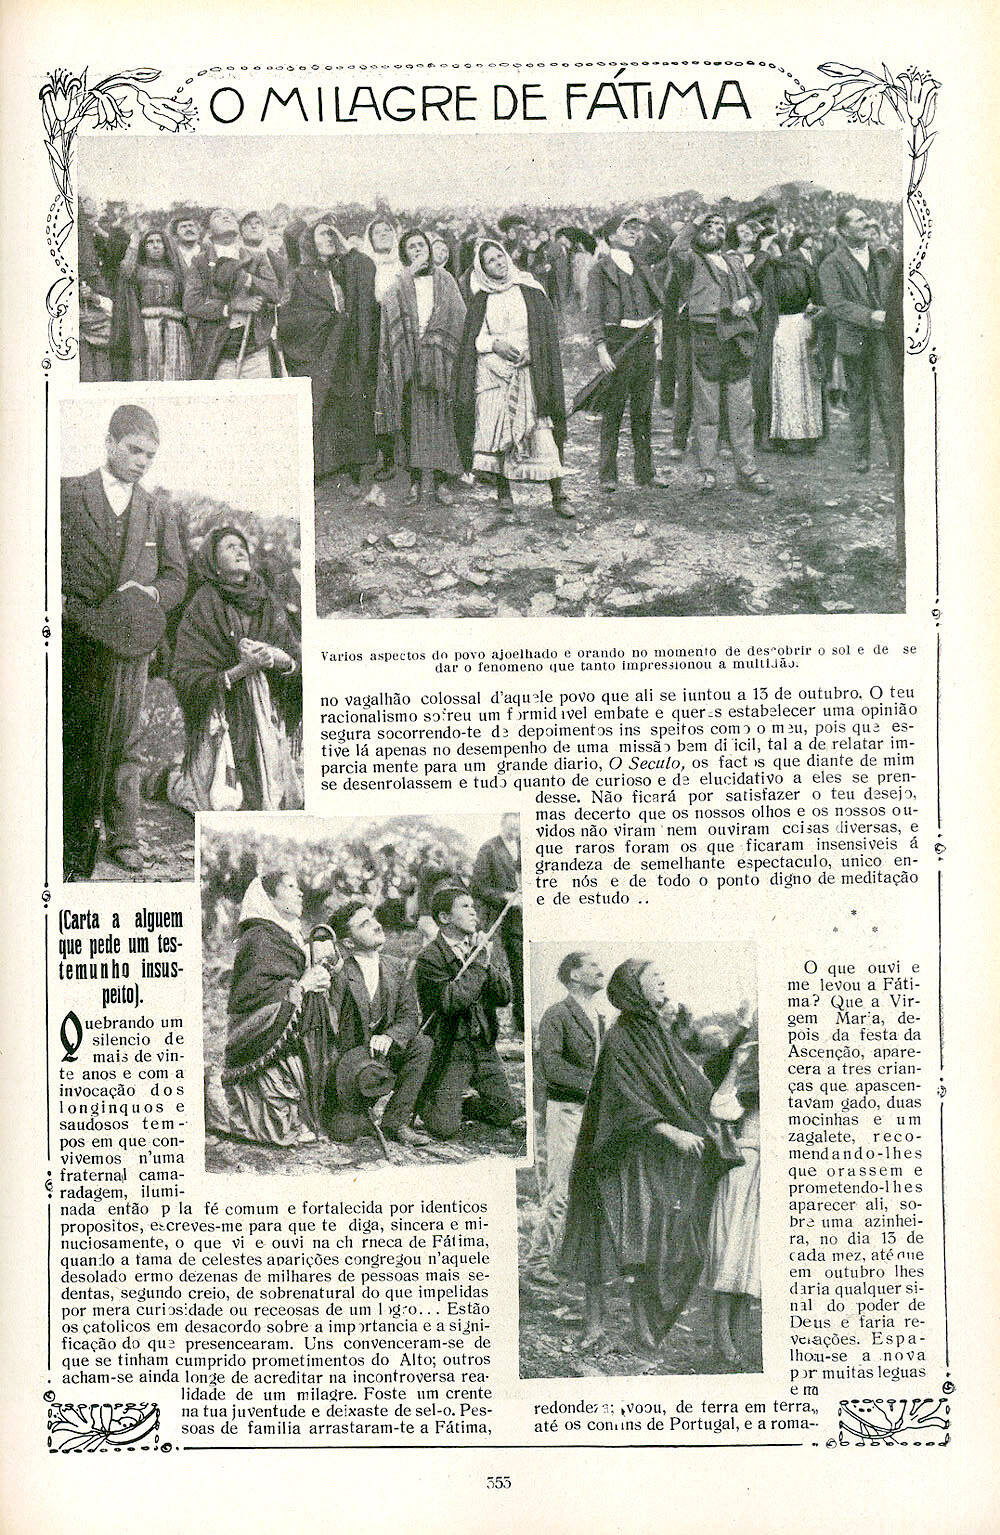 A newspaper article about the Fátima miracles 